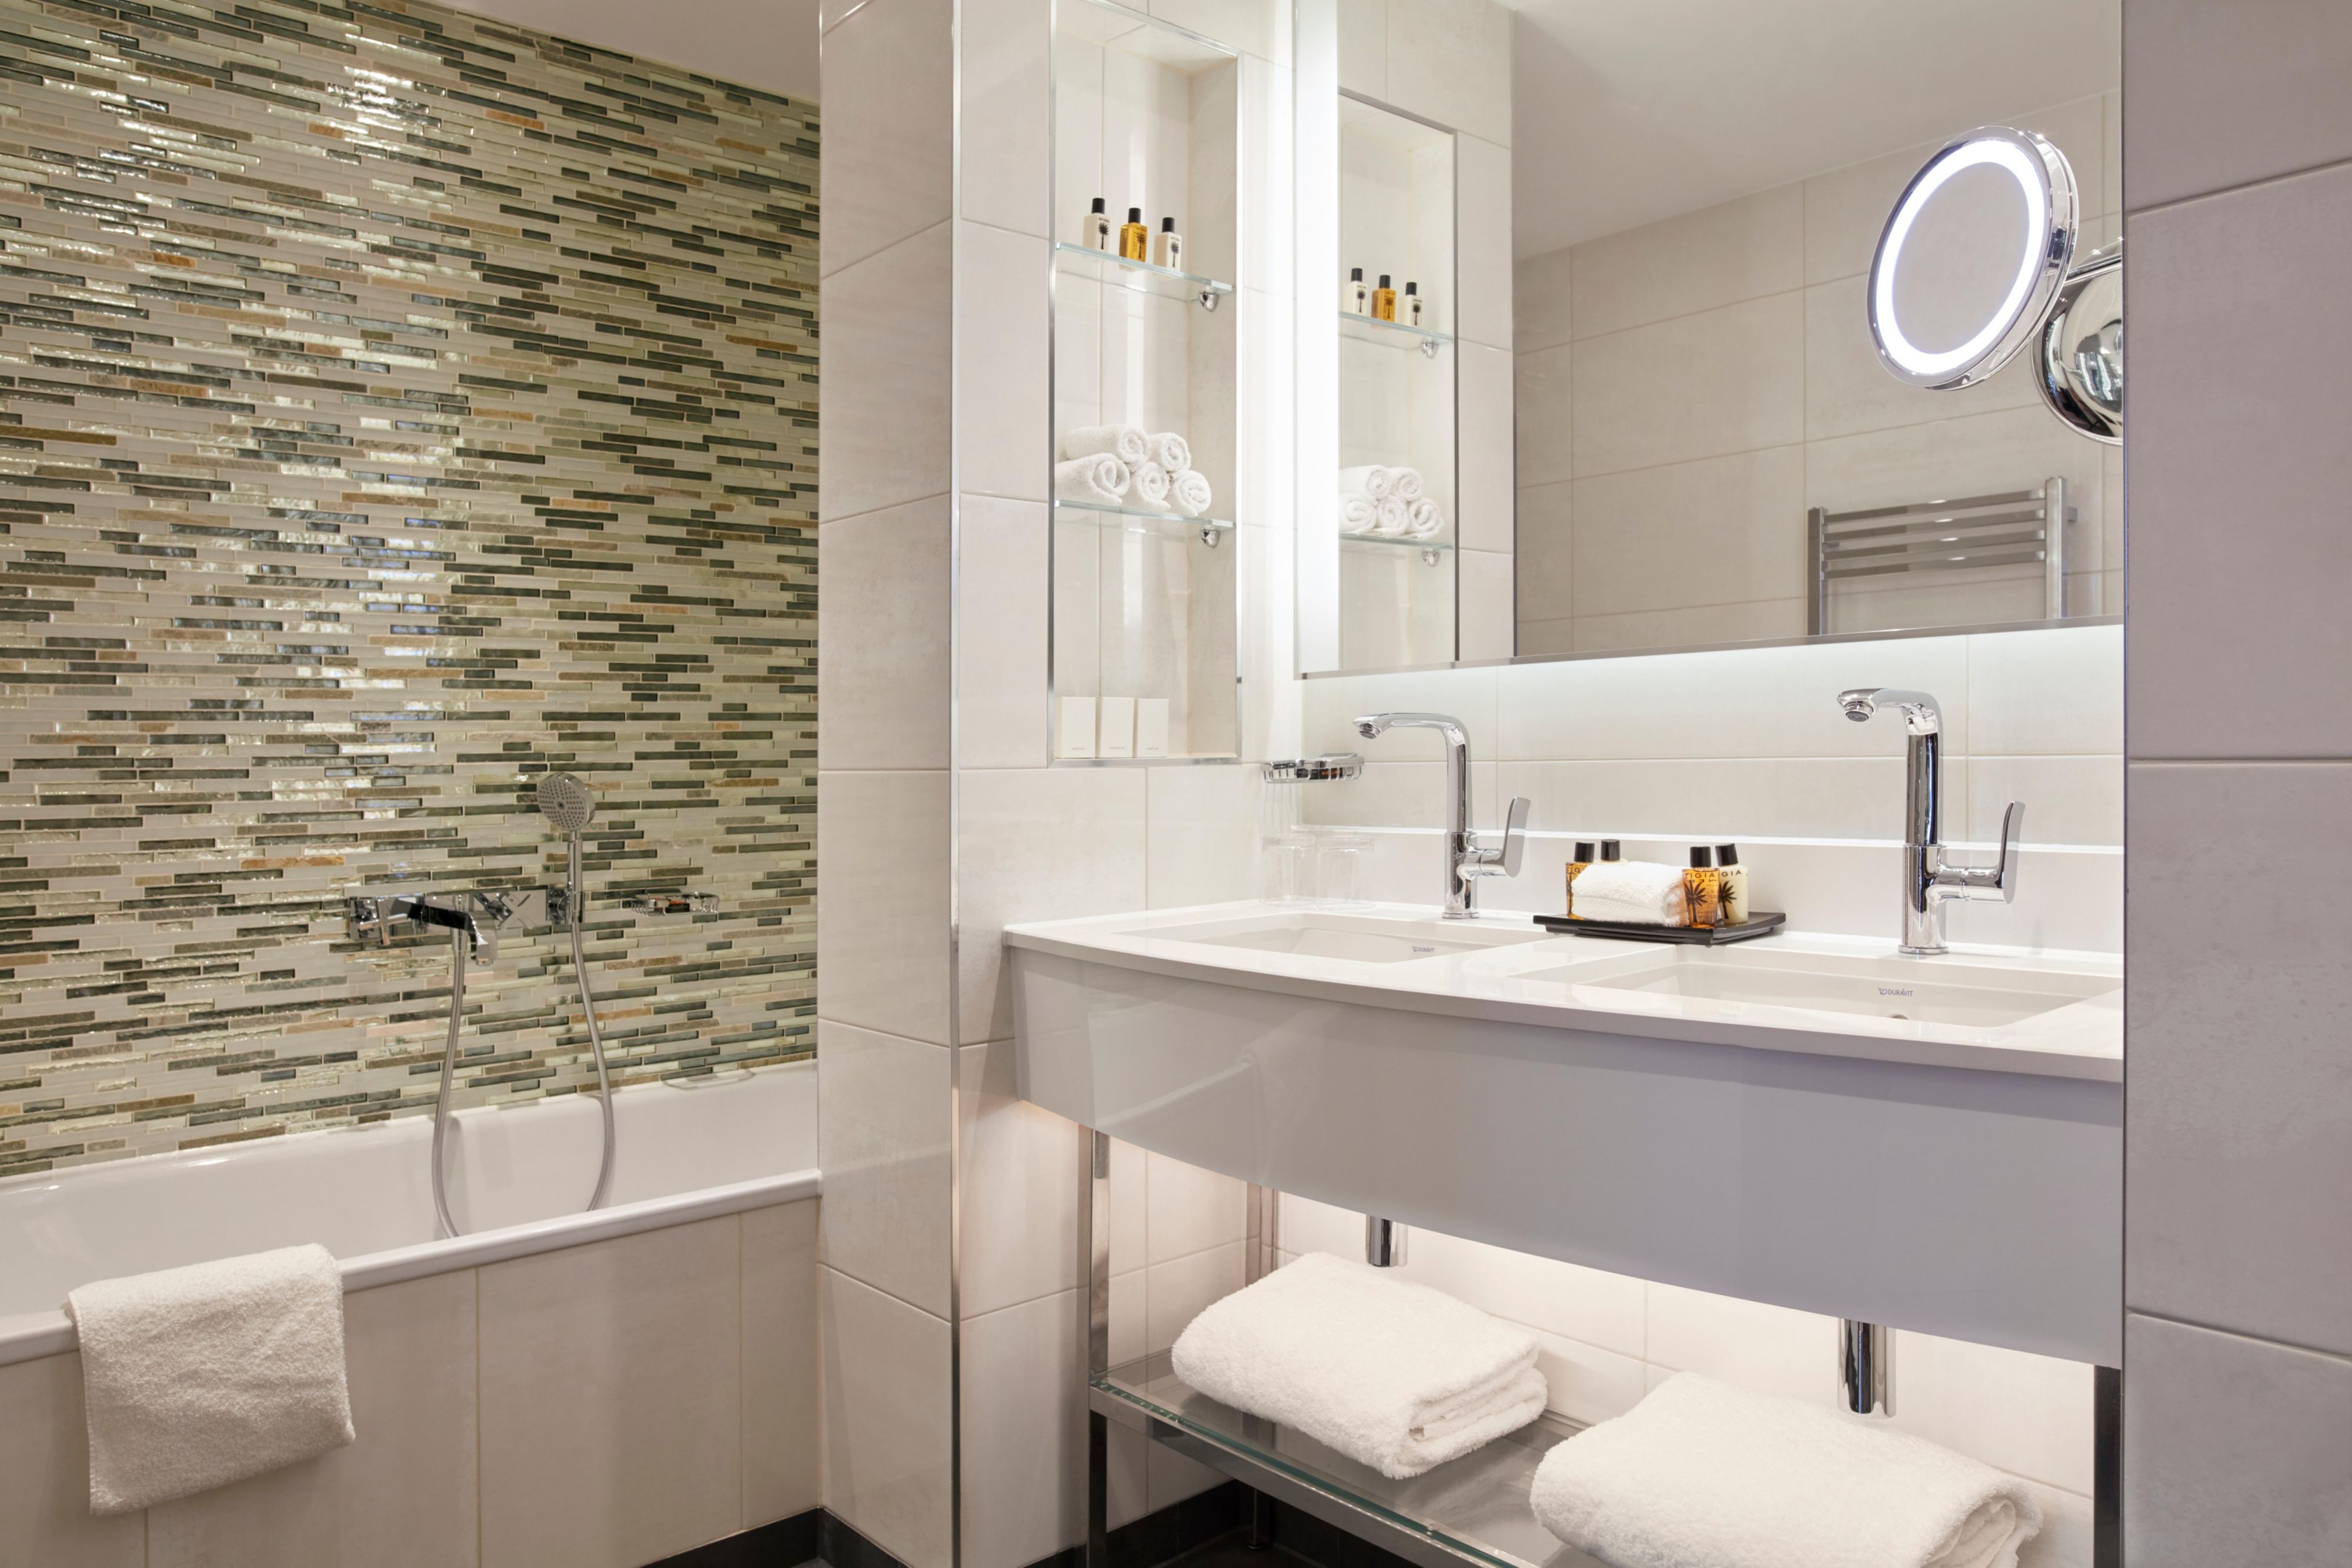 Our suite bathrooms offer luxury with a stunning design